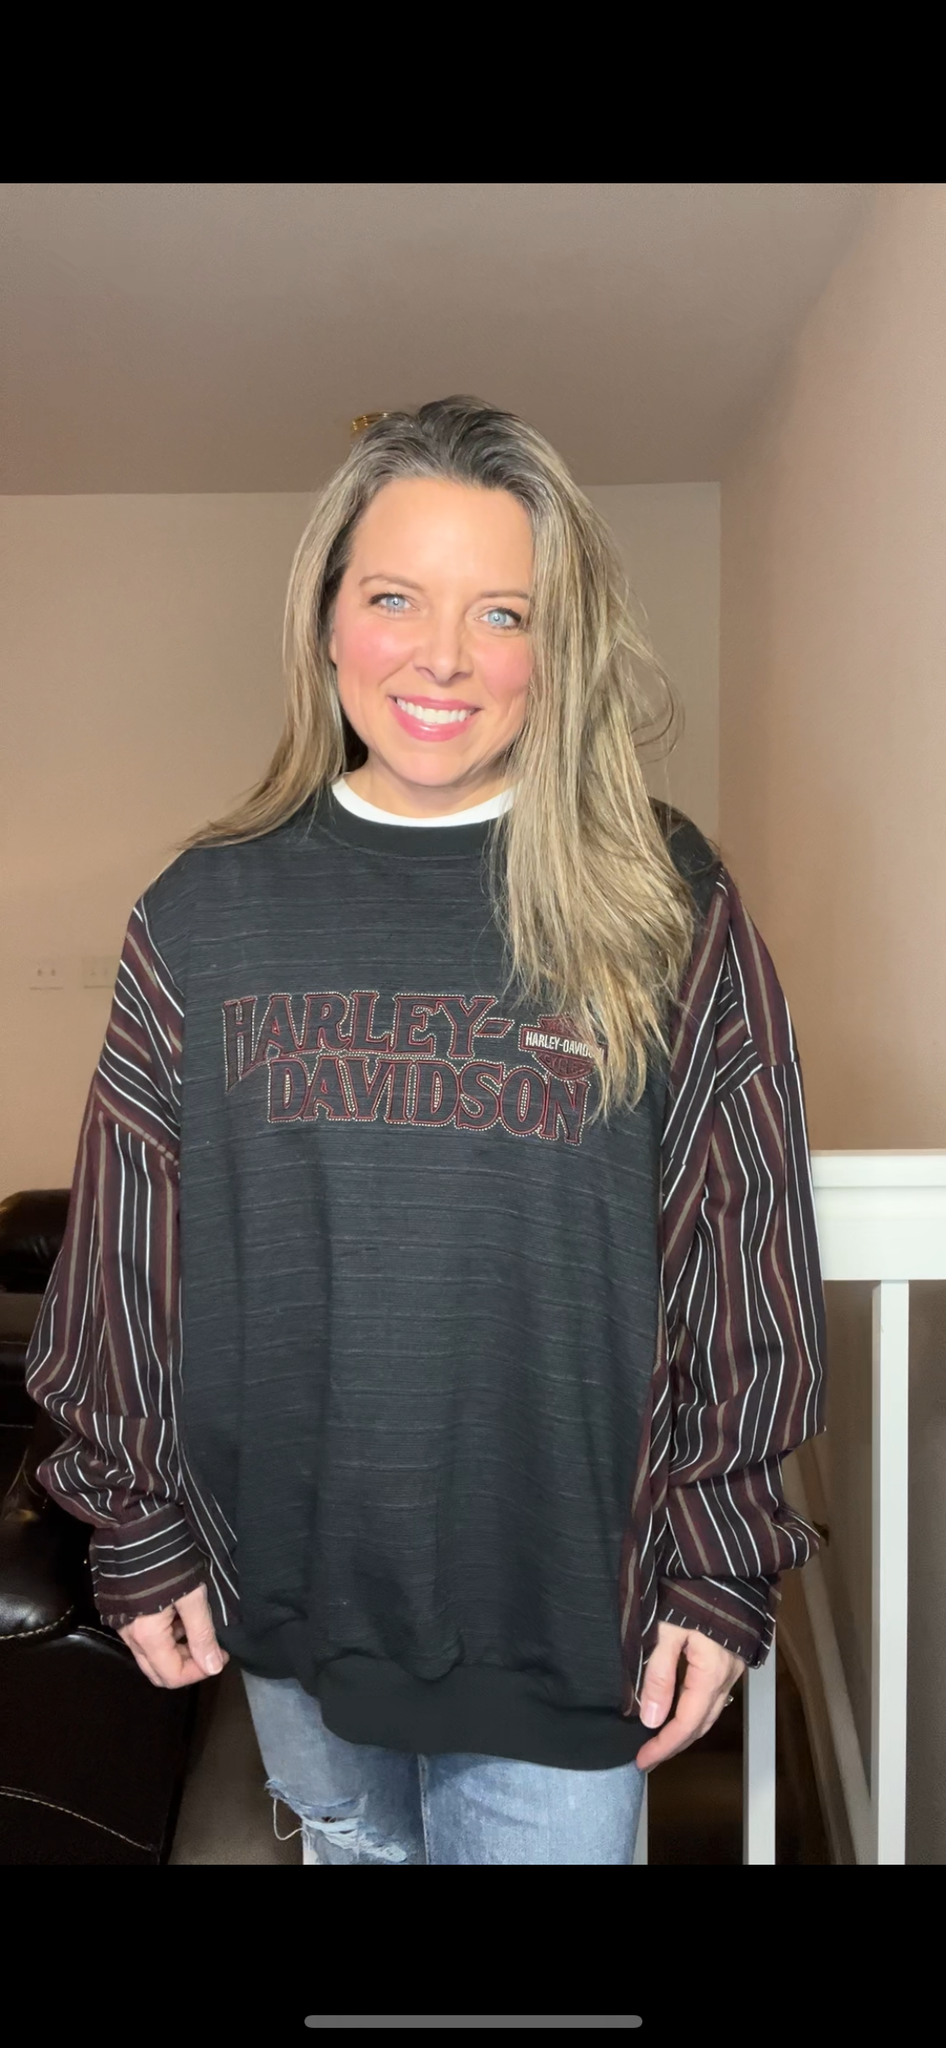 Harley Davidson - woman’s 2X – thin french terry sweatshirt with cotton sleeves ￼￼